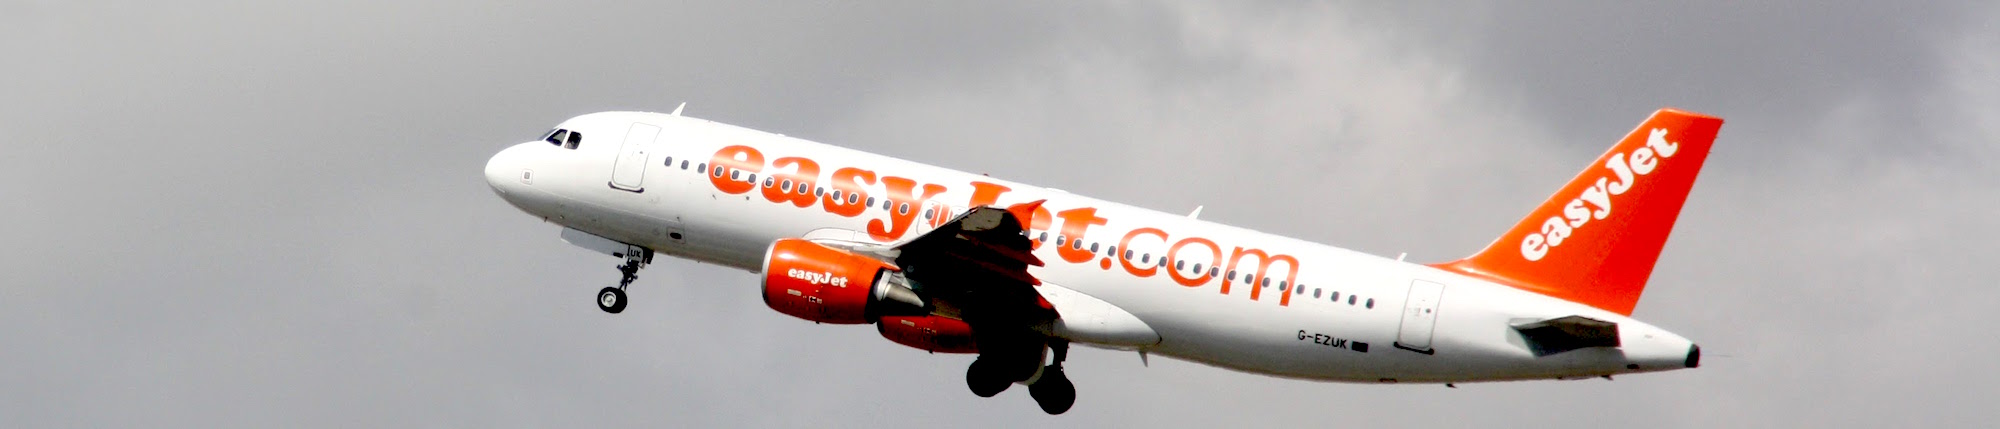 Best time to book flights for Amsterdam (AMS) to Glasgow (GLA) flights with EasyJet at AirHint